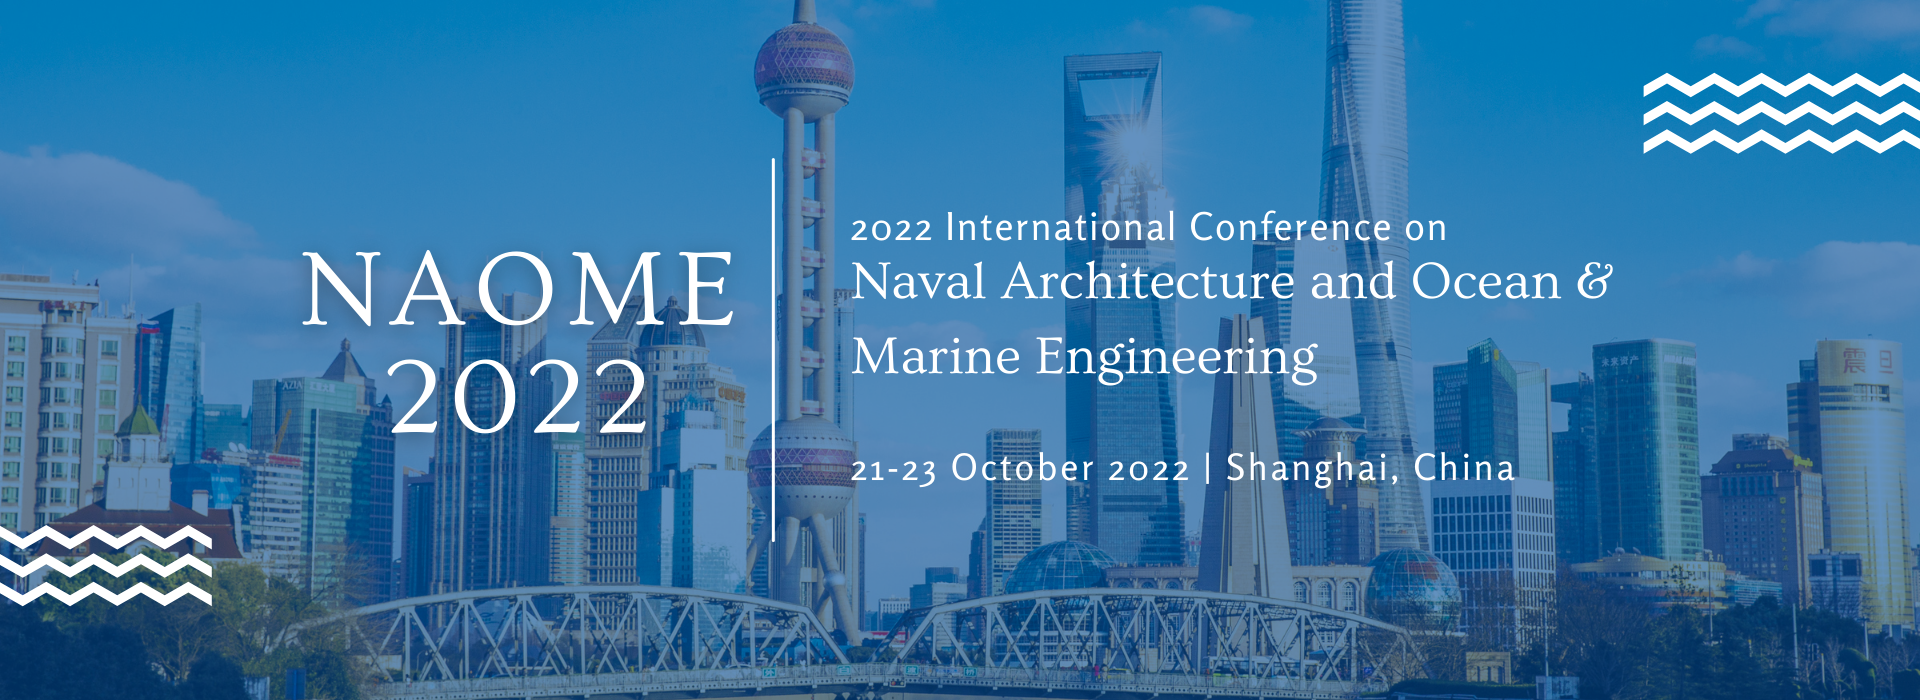 Call for Papers in International Conference on Naval Architecture and Ocean & Marine Engineering (NAOME 2022)